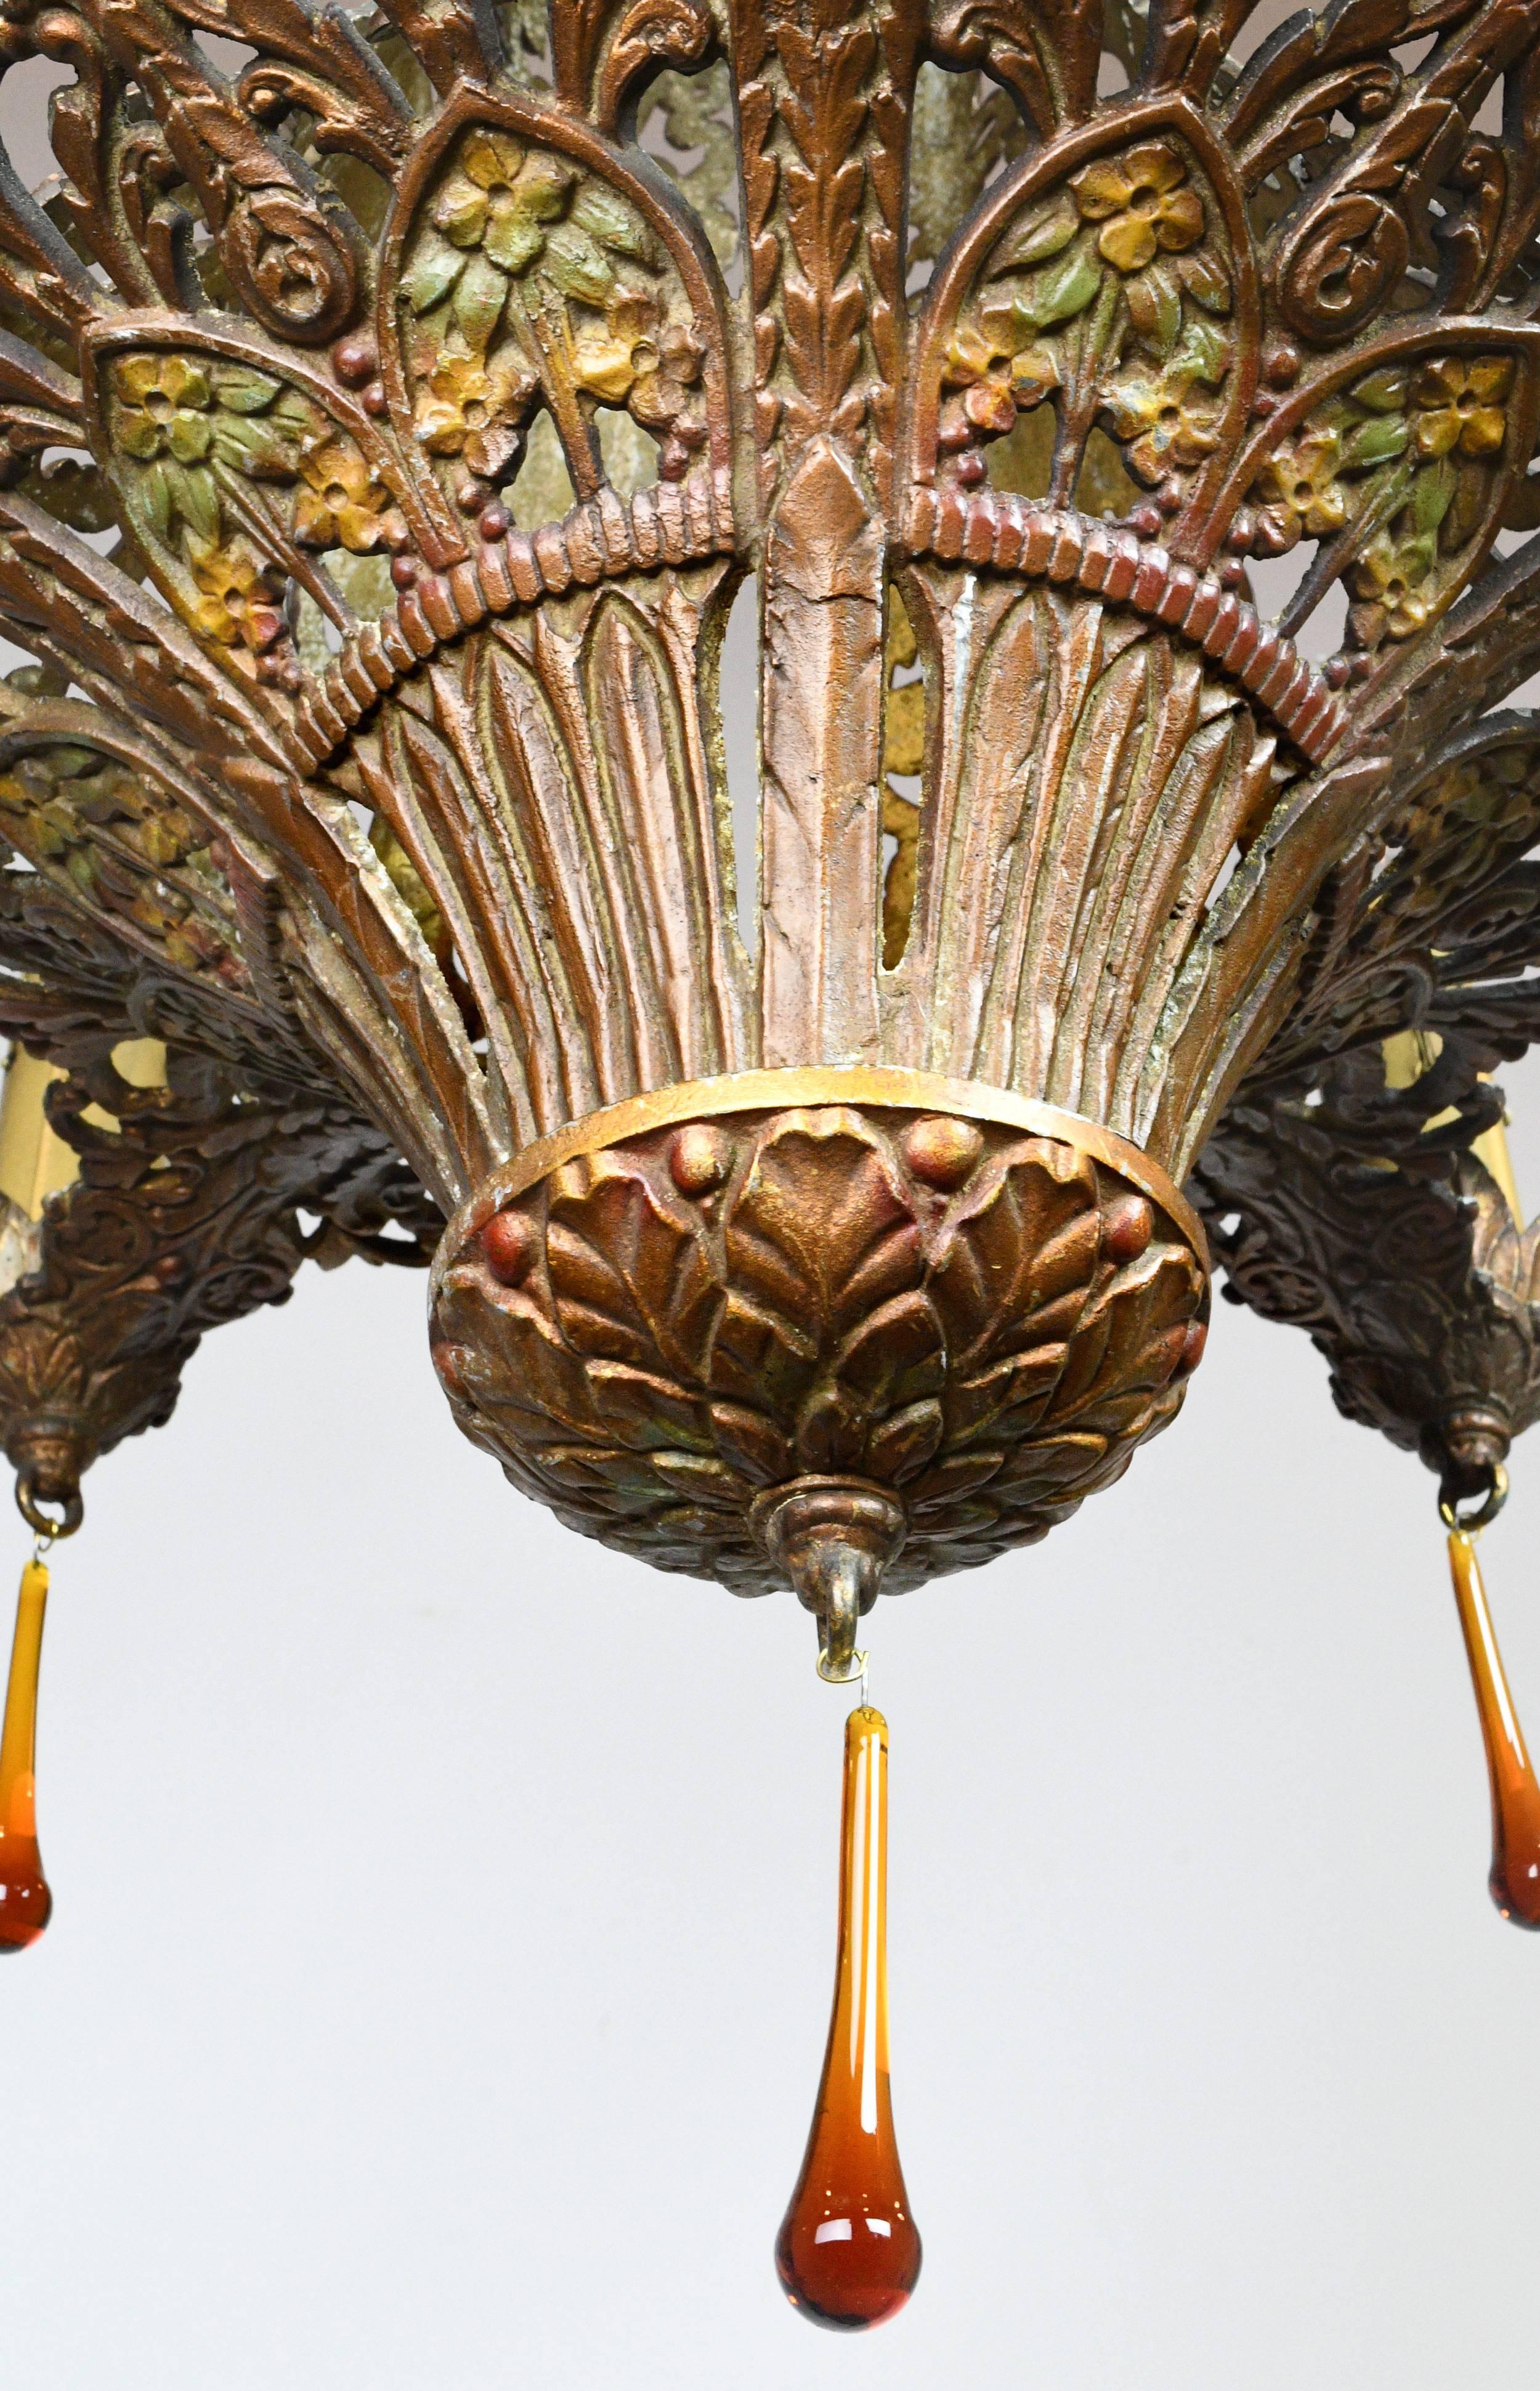 This gorgeous cast aluminium chandelier features intricate filigree details decorated in a polychrome finish of many colors. The leafy candle holders align with the botanical details throughout the fixture's body, and amber teardrop crystals add an